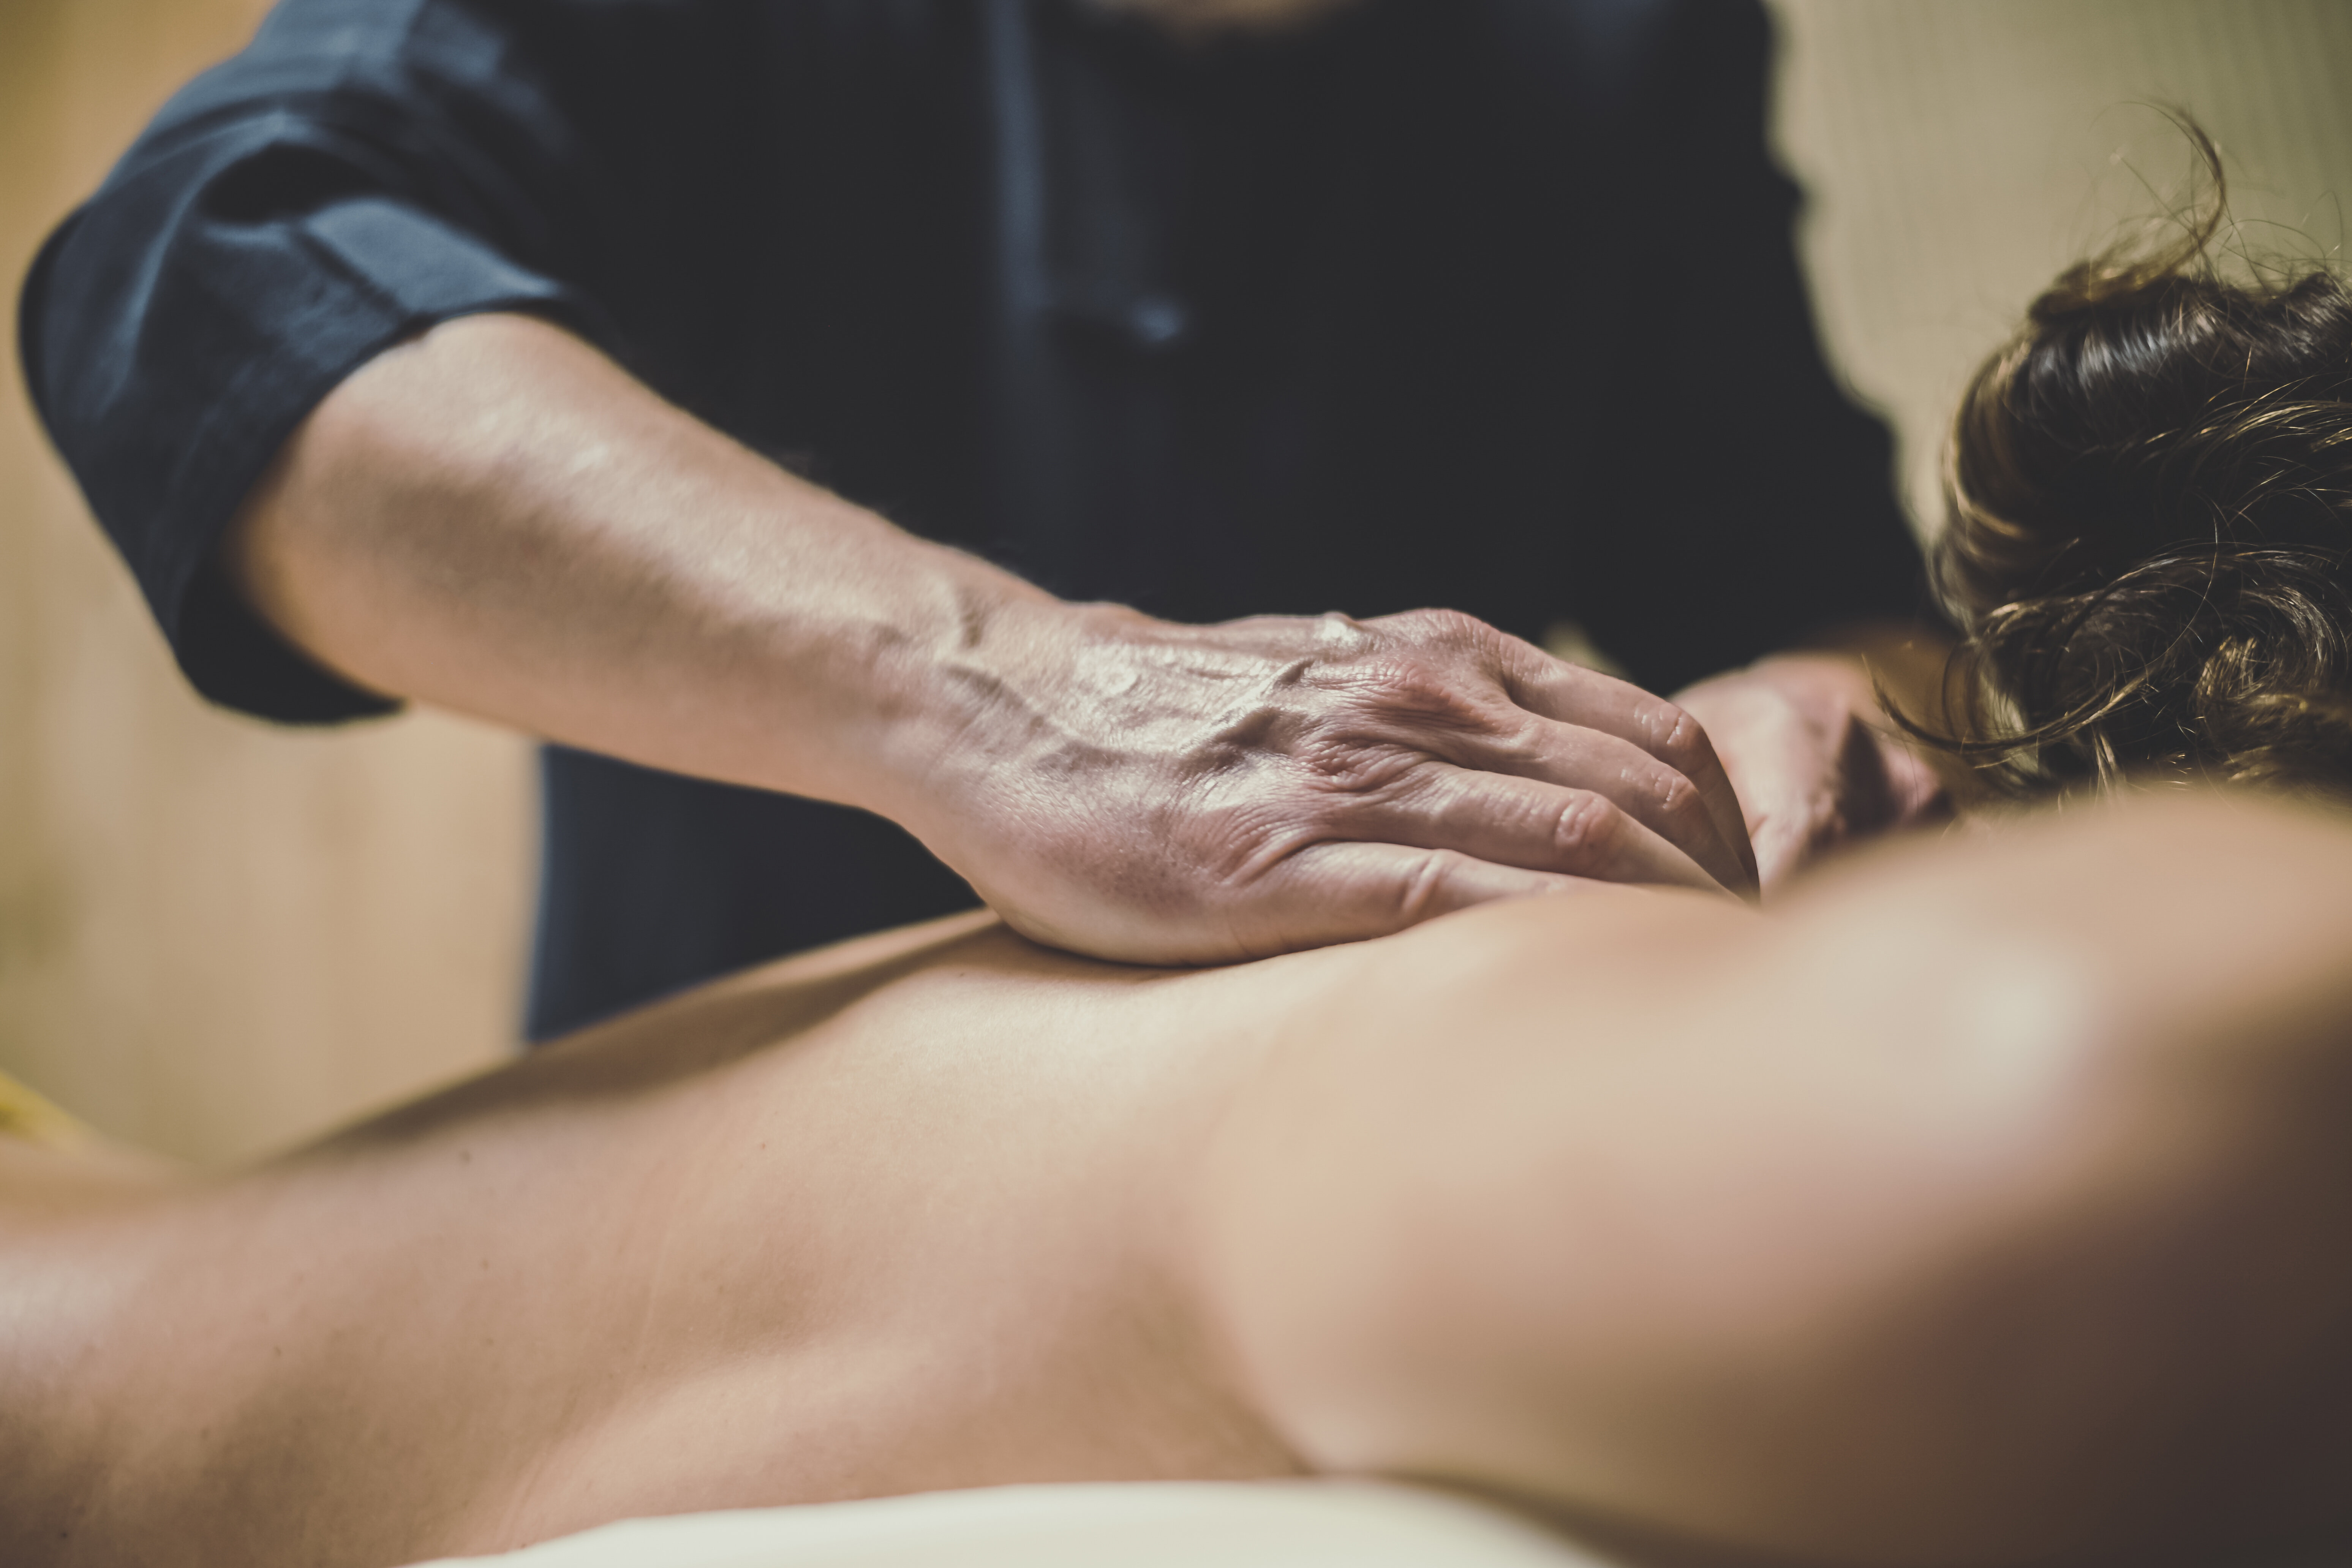 Wife Gets Happy Ending Massage